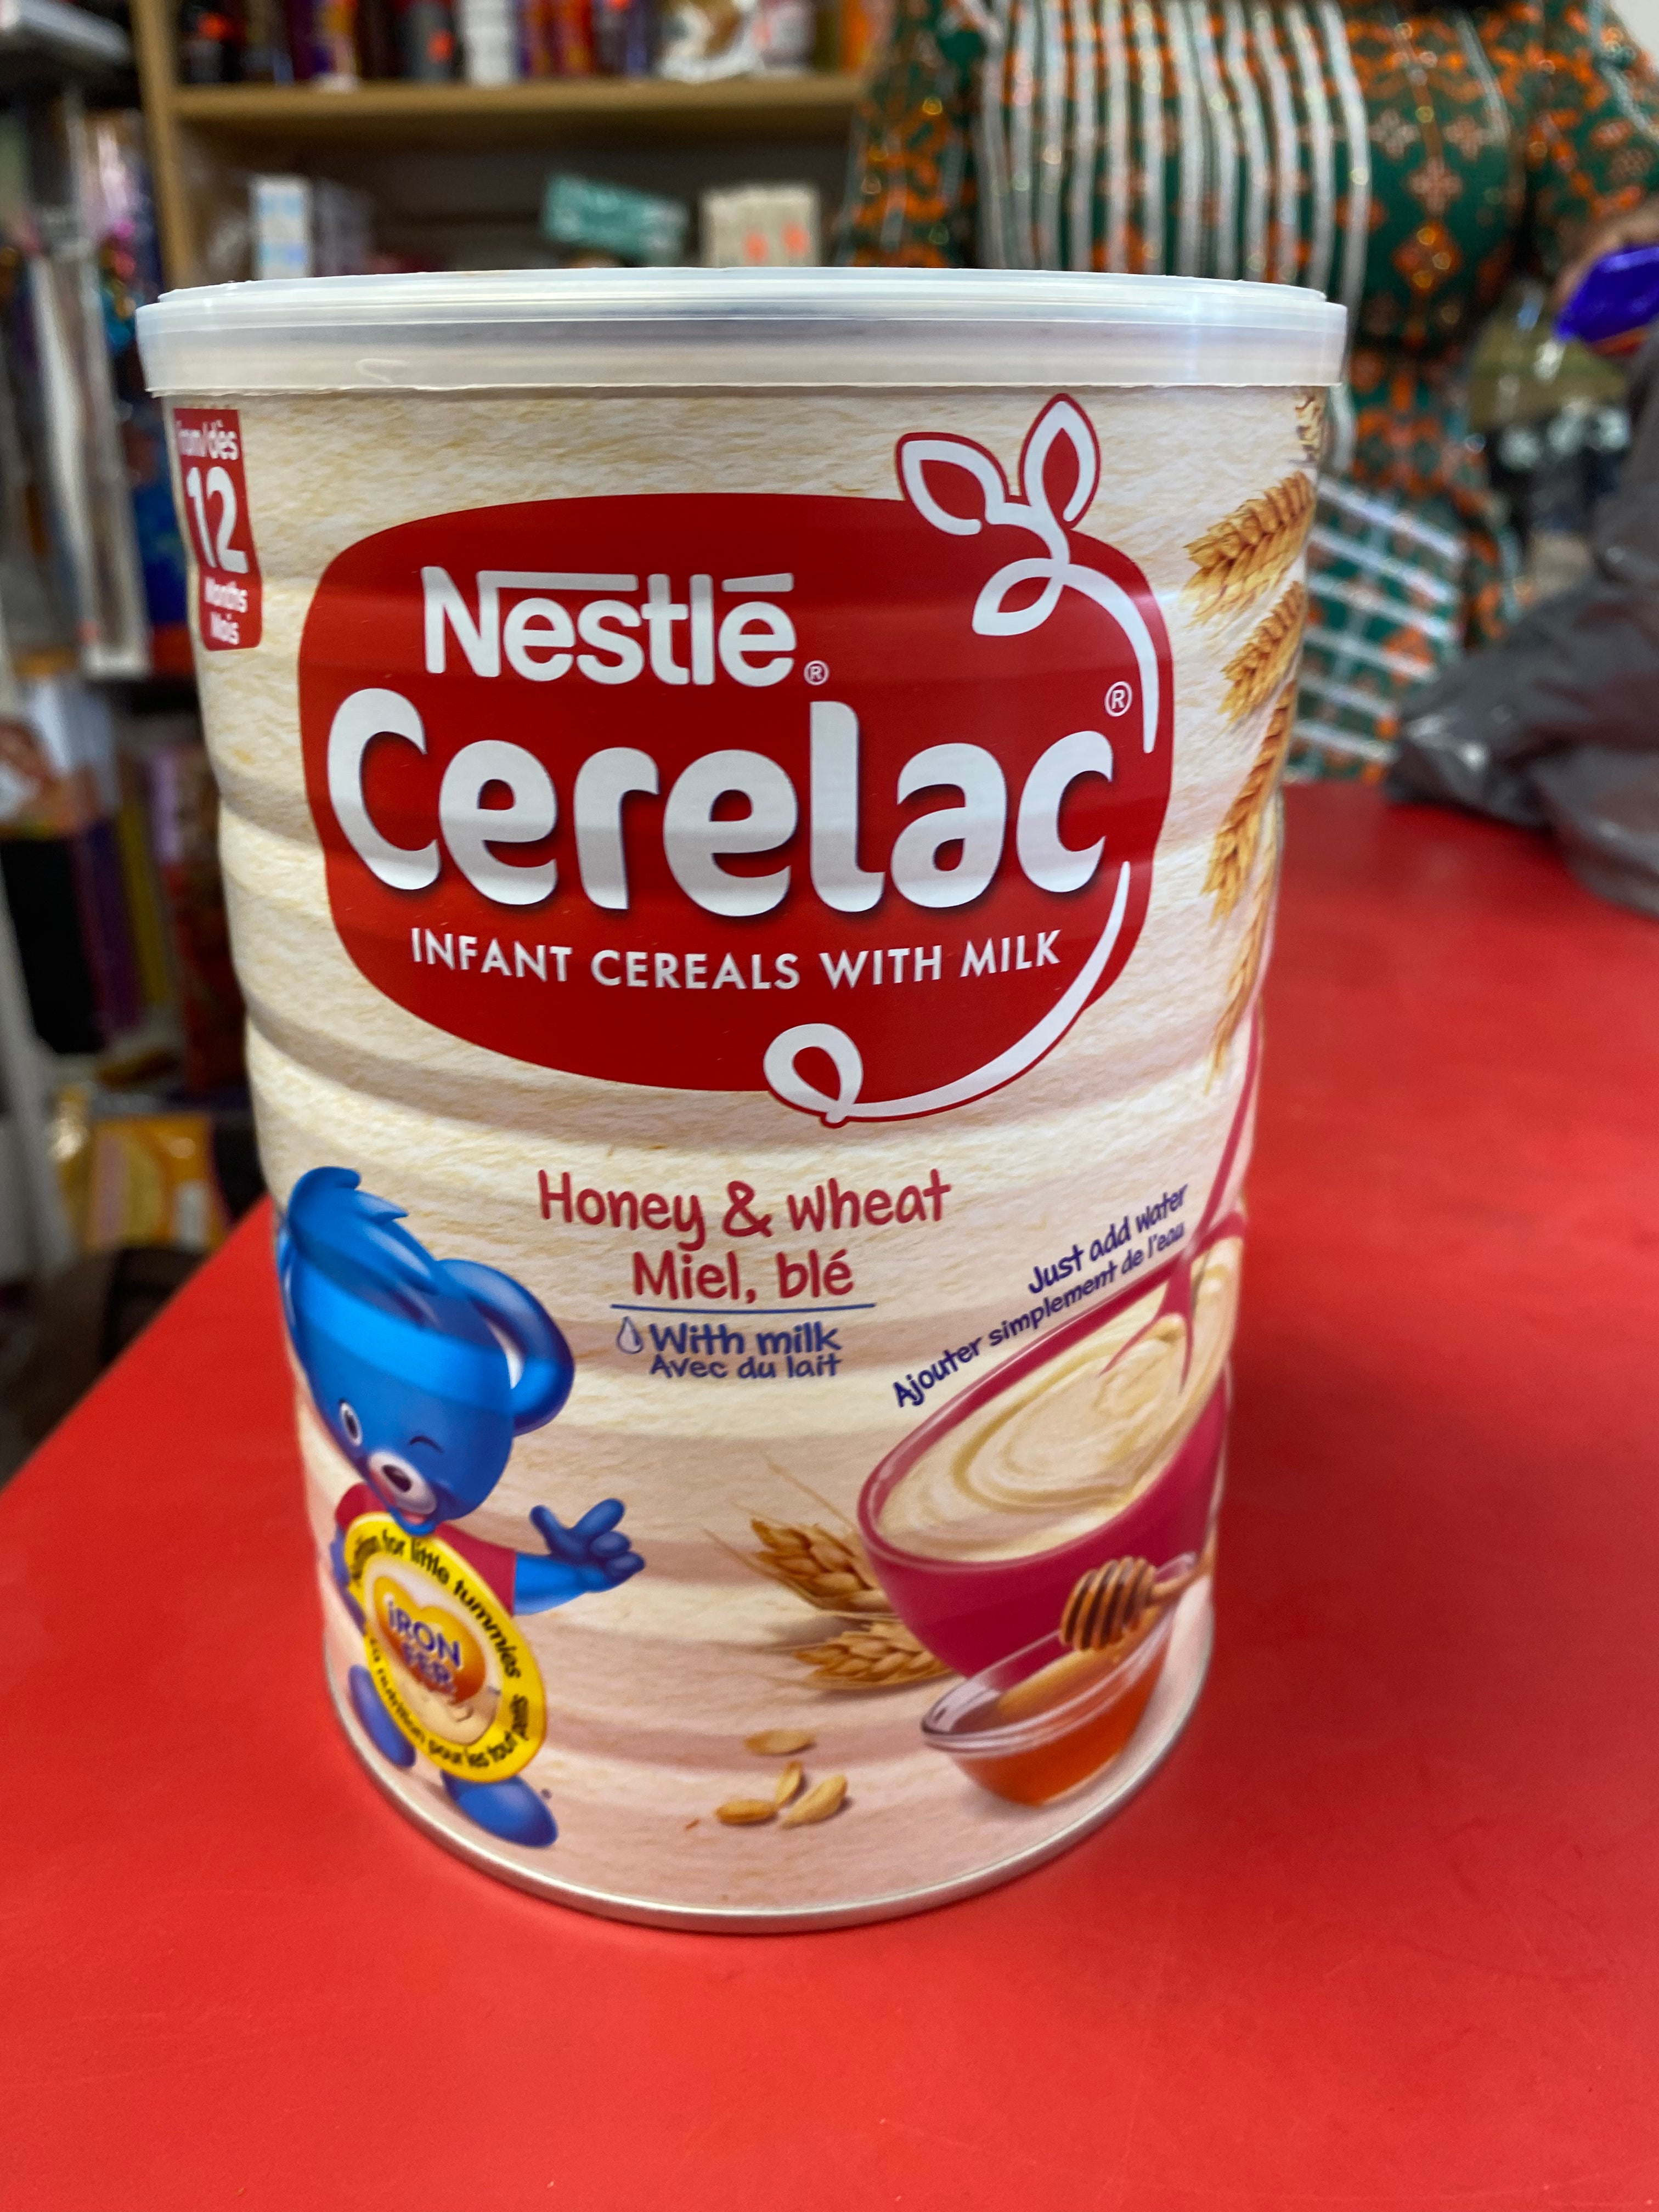 Cerelac Honey and Wheat